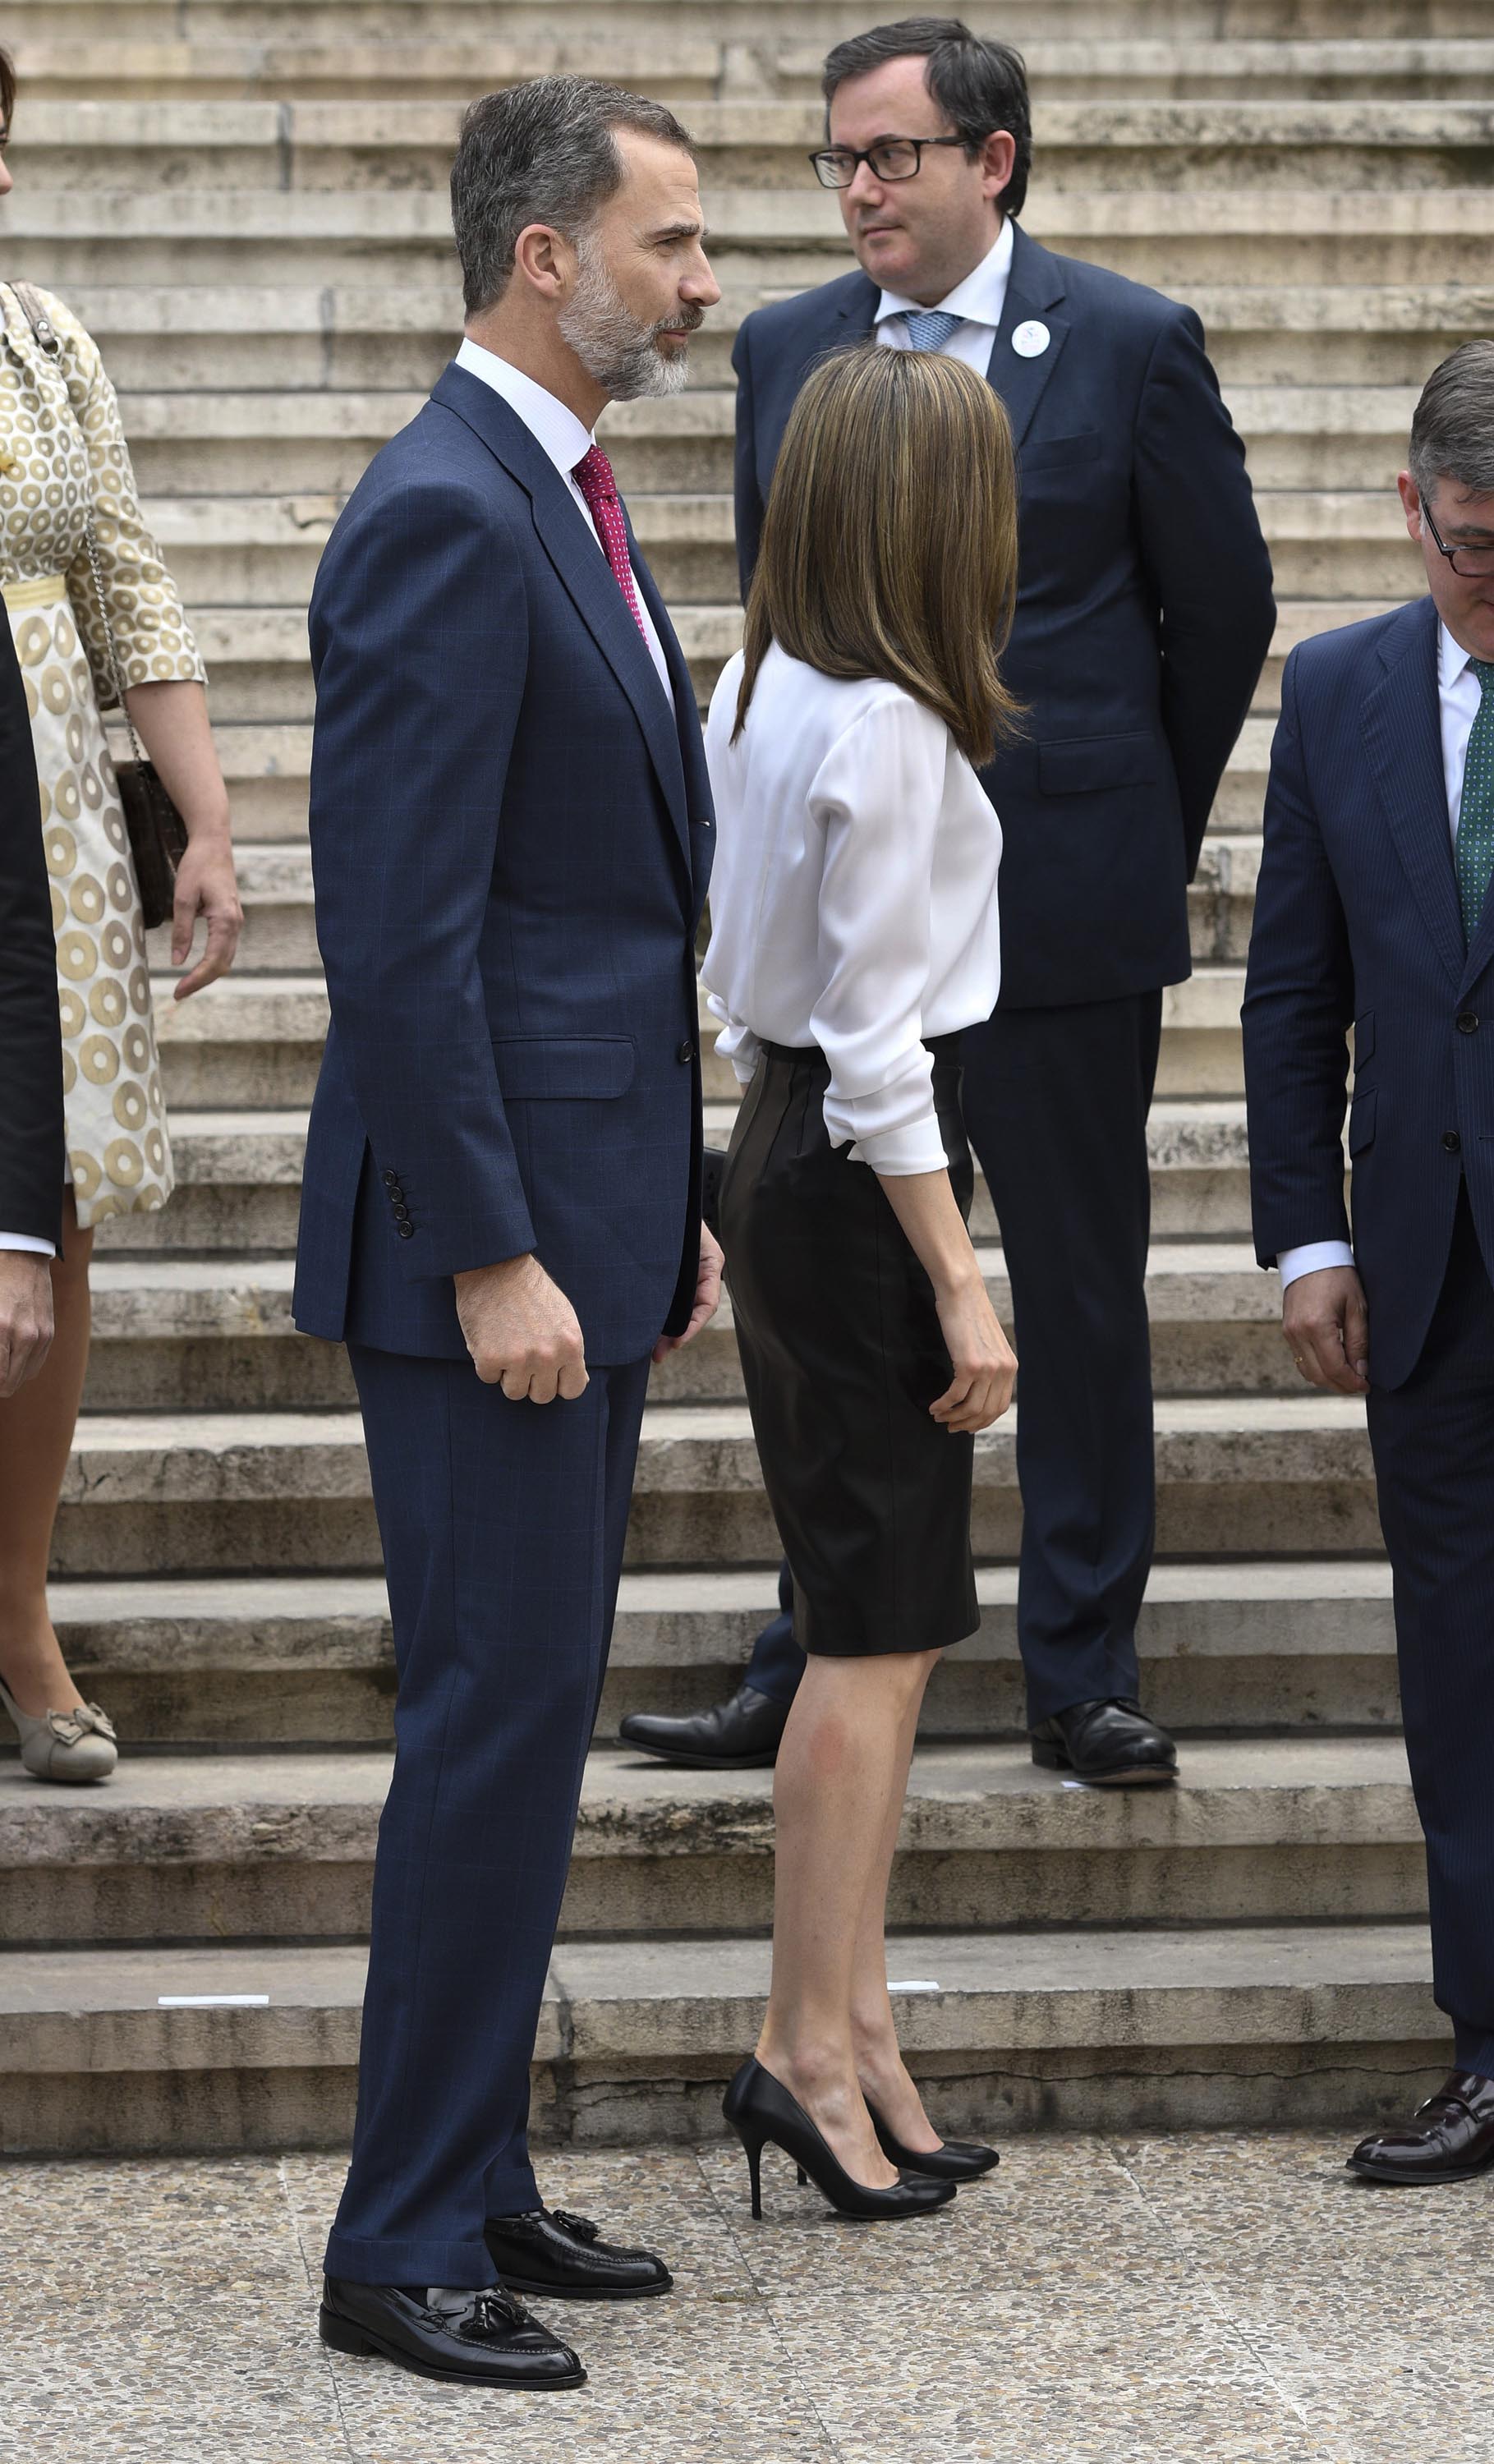 Queen Letizia of Spain at the opening exhibition of the National Library